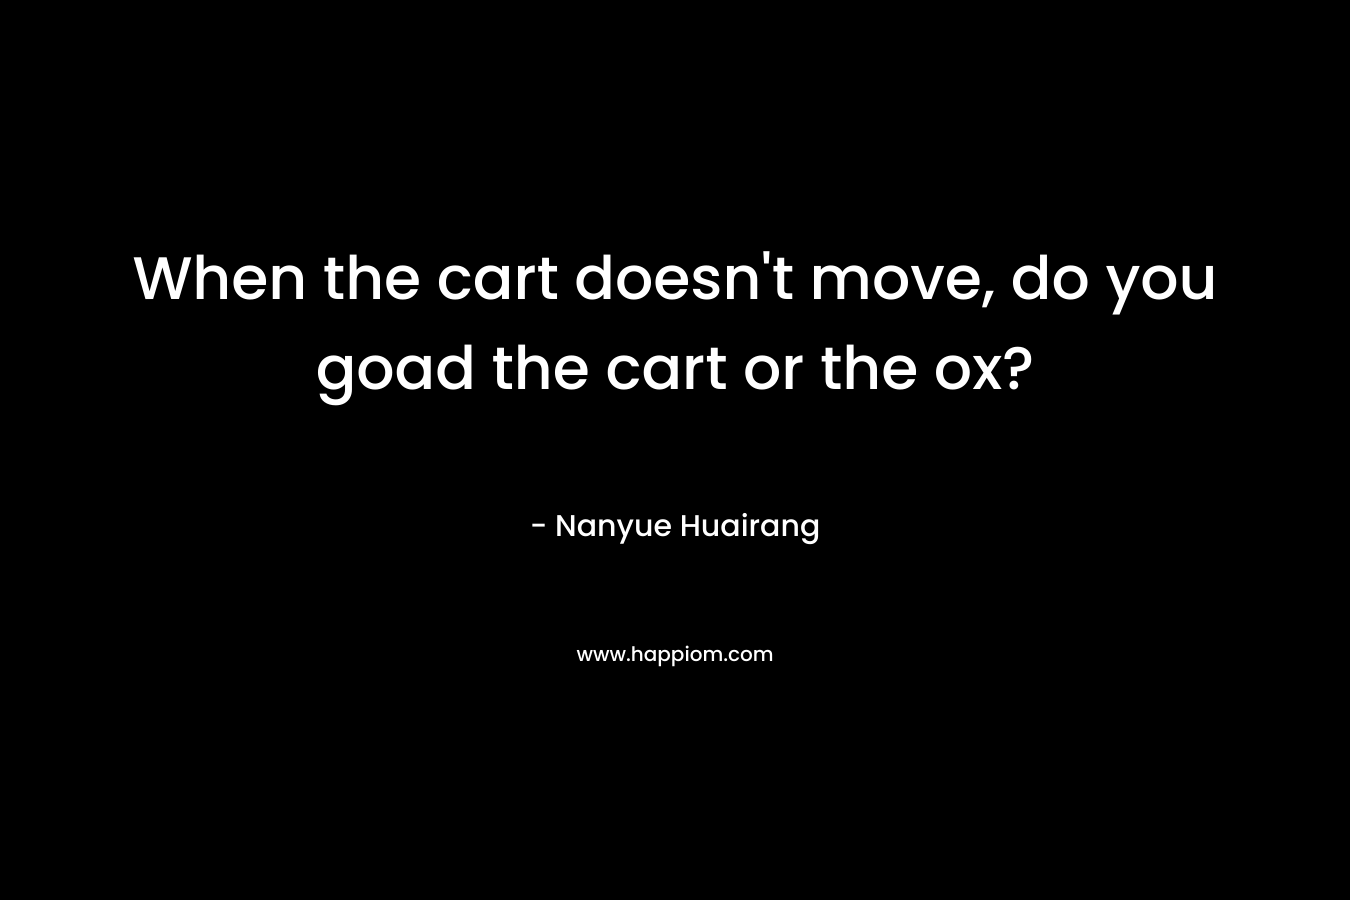 When the cart doesn’t move, do you goad the cart or the ox? – Nanyue Huairang